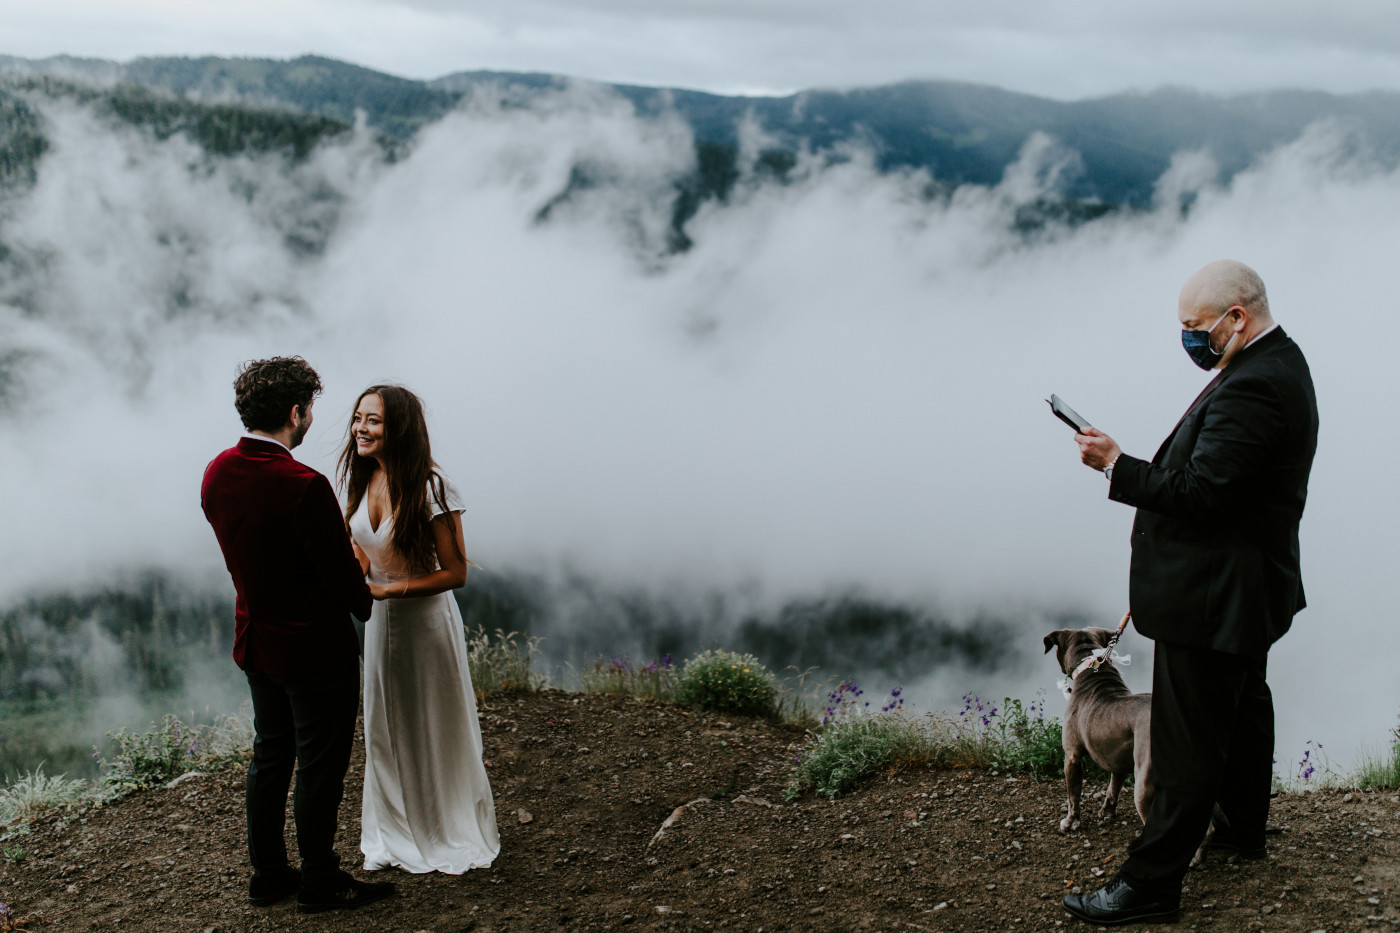 Murray and Katelyn during their ceremony as their officiant reads to them. Elopement wedding photography at Mount Hood by Sienna Plus Josh.